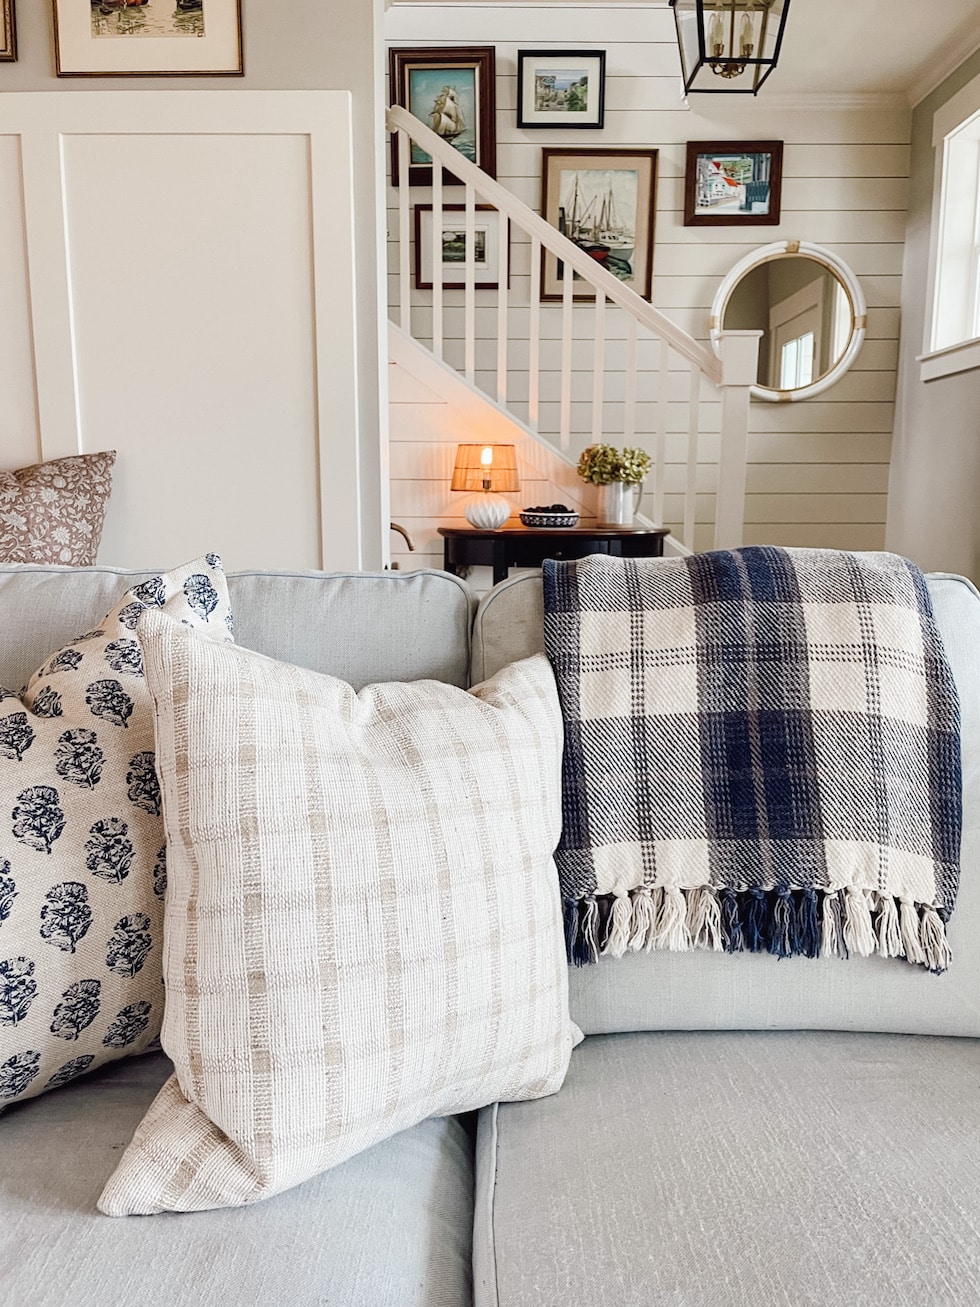 7 Simple Ways We Made our House Feel Like Home (in the first year!)